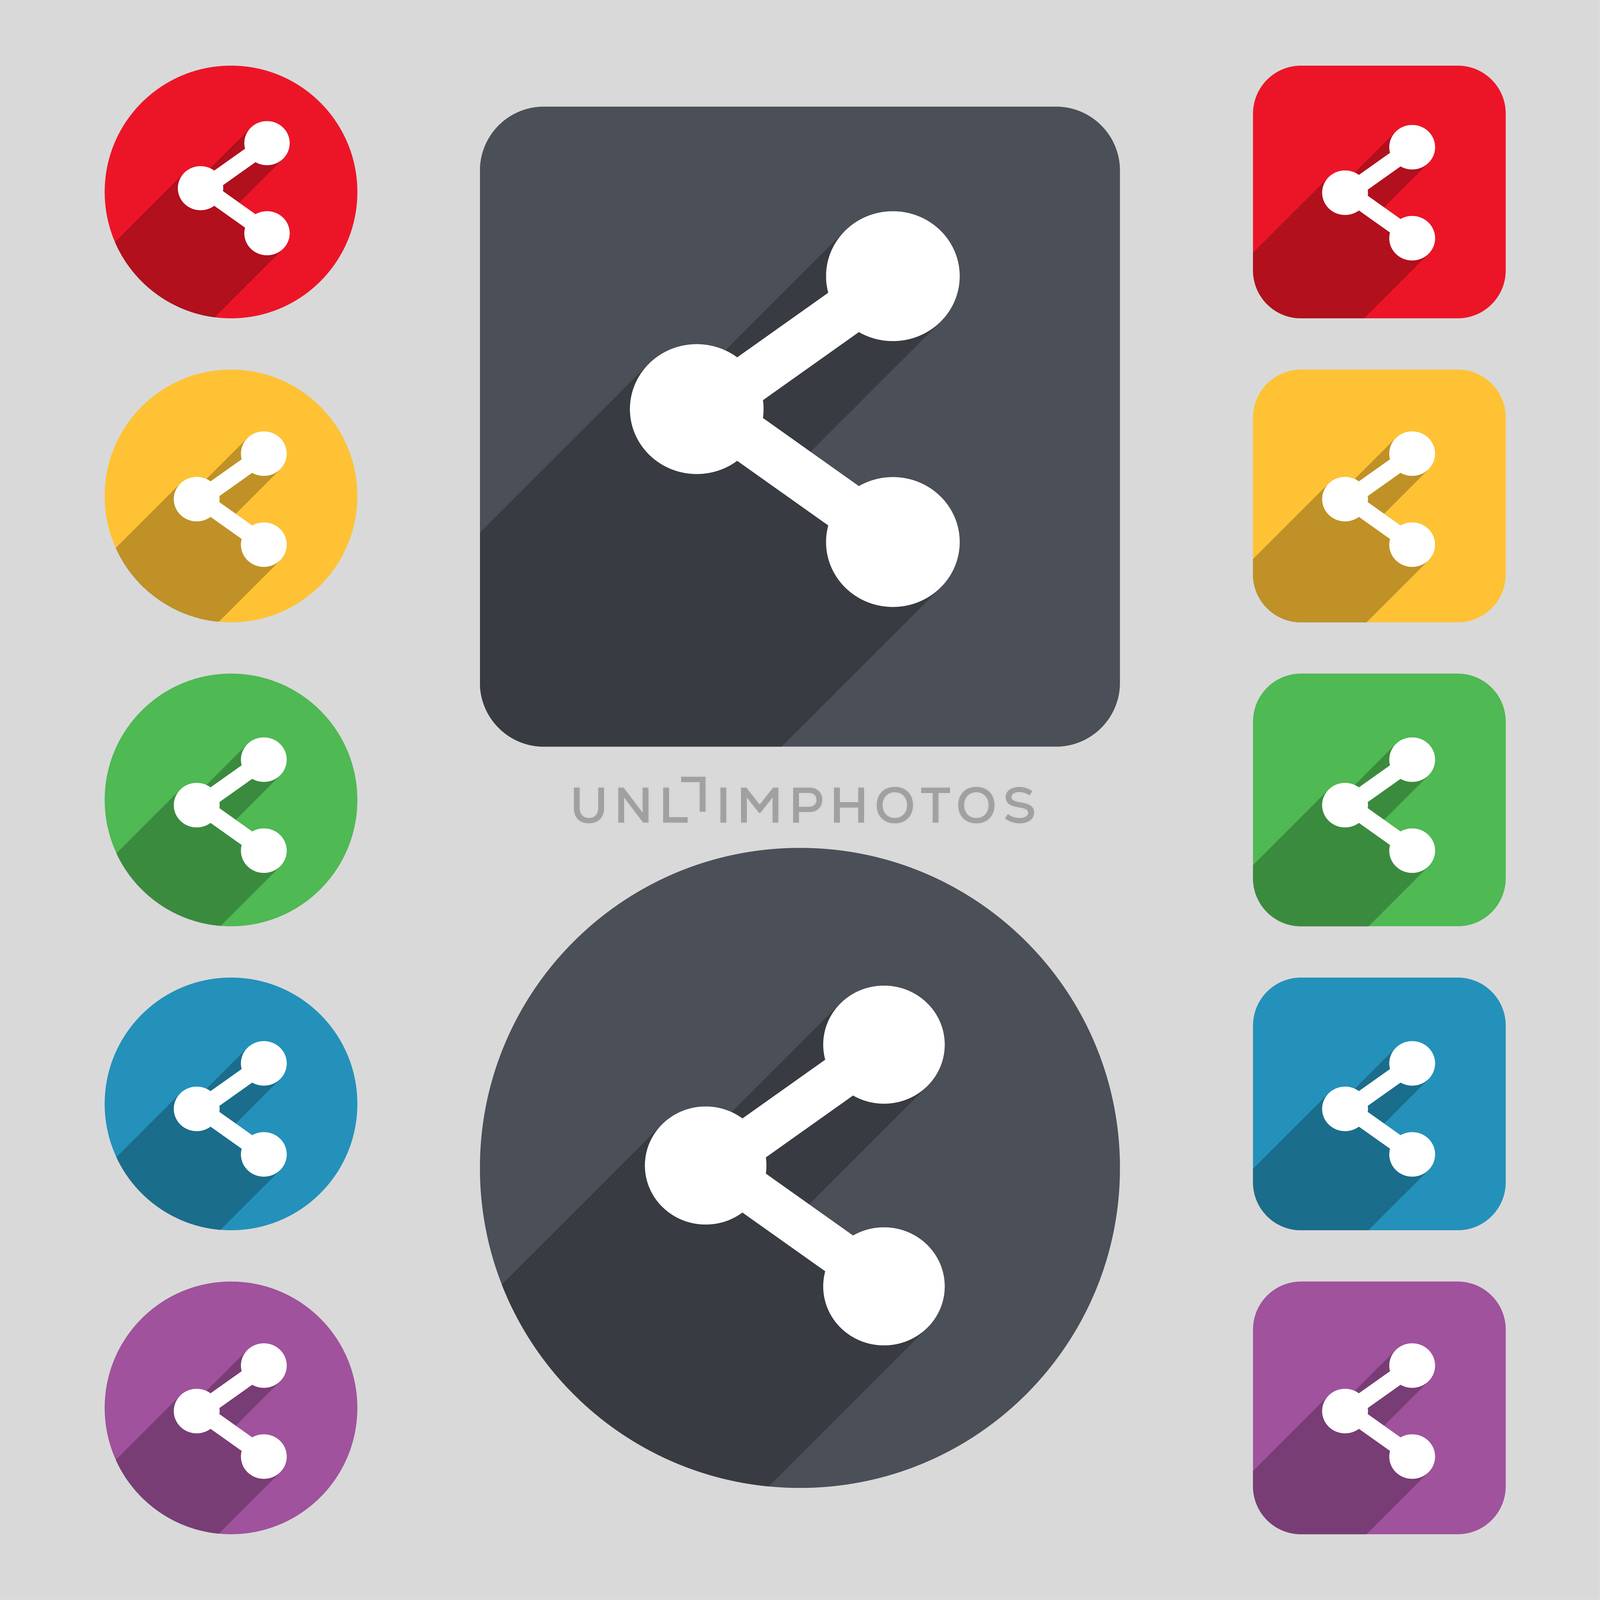 Share icon sign. A set of 12 colored buttons and a long shadow. Flat design. illustration